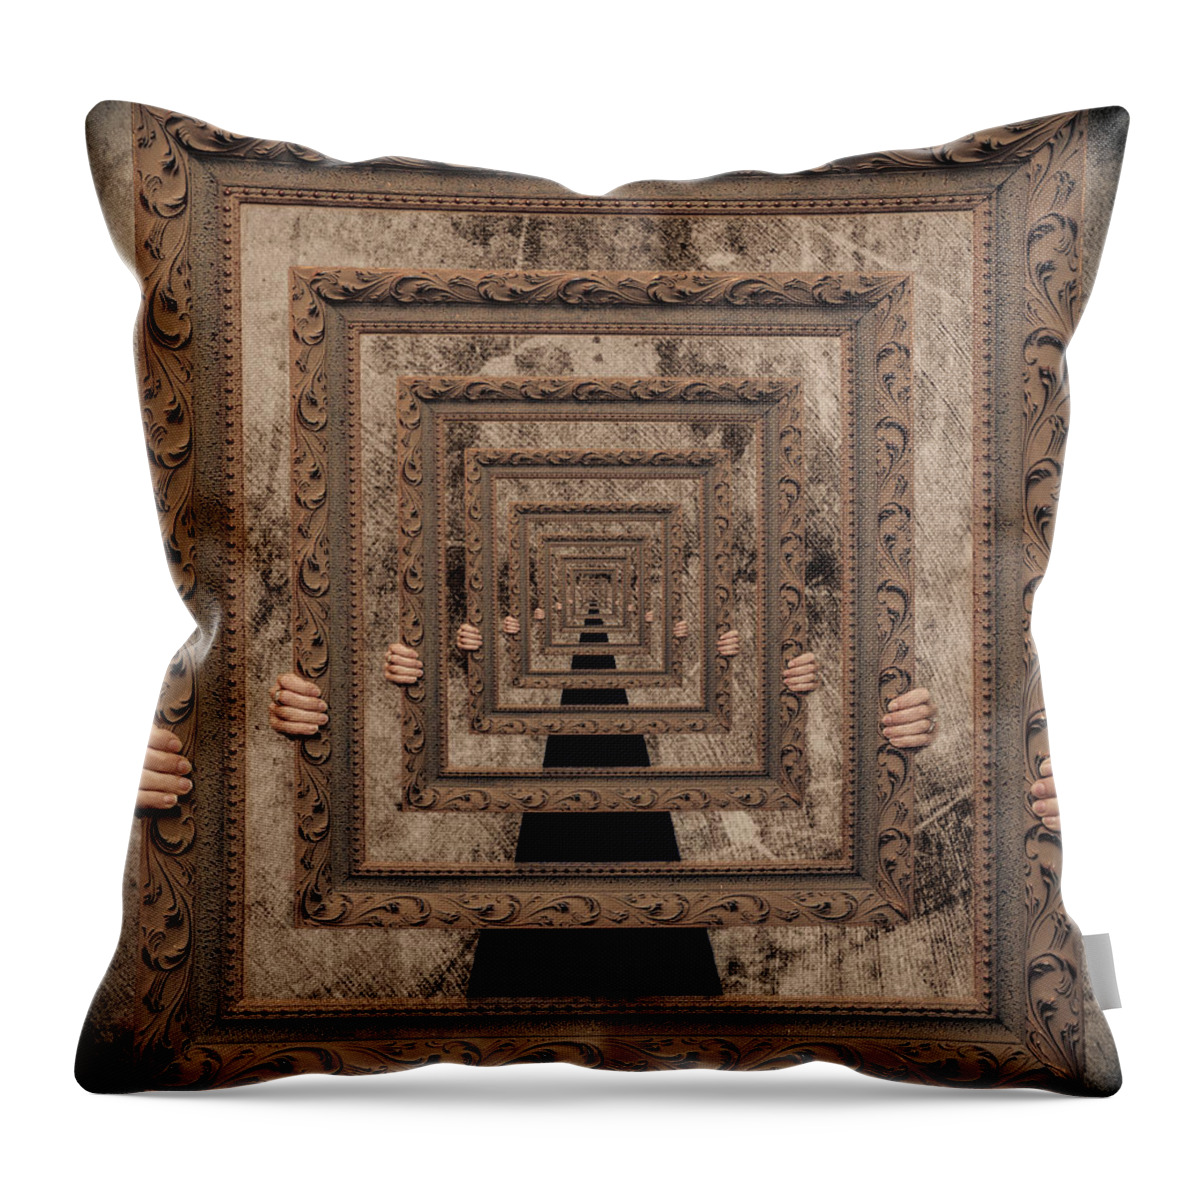 Infinity Throw Pillow featuring the photograph Infinity by Anna Rumiantseva